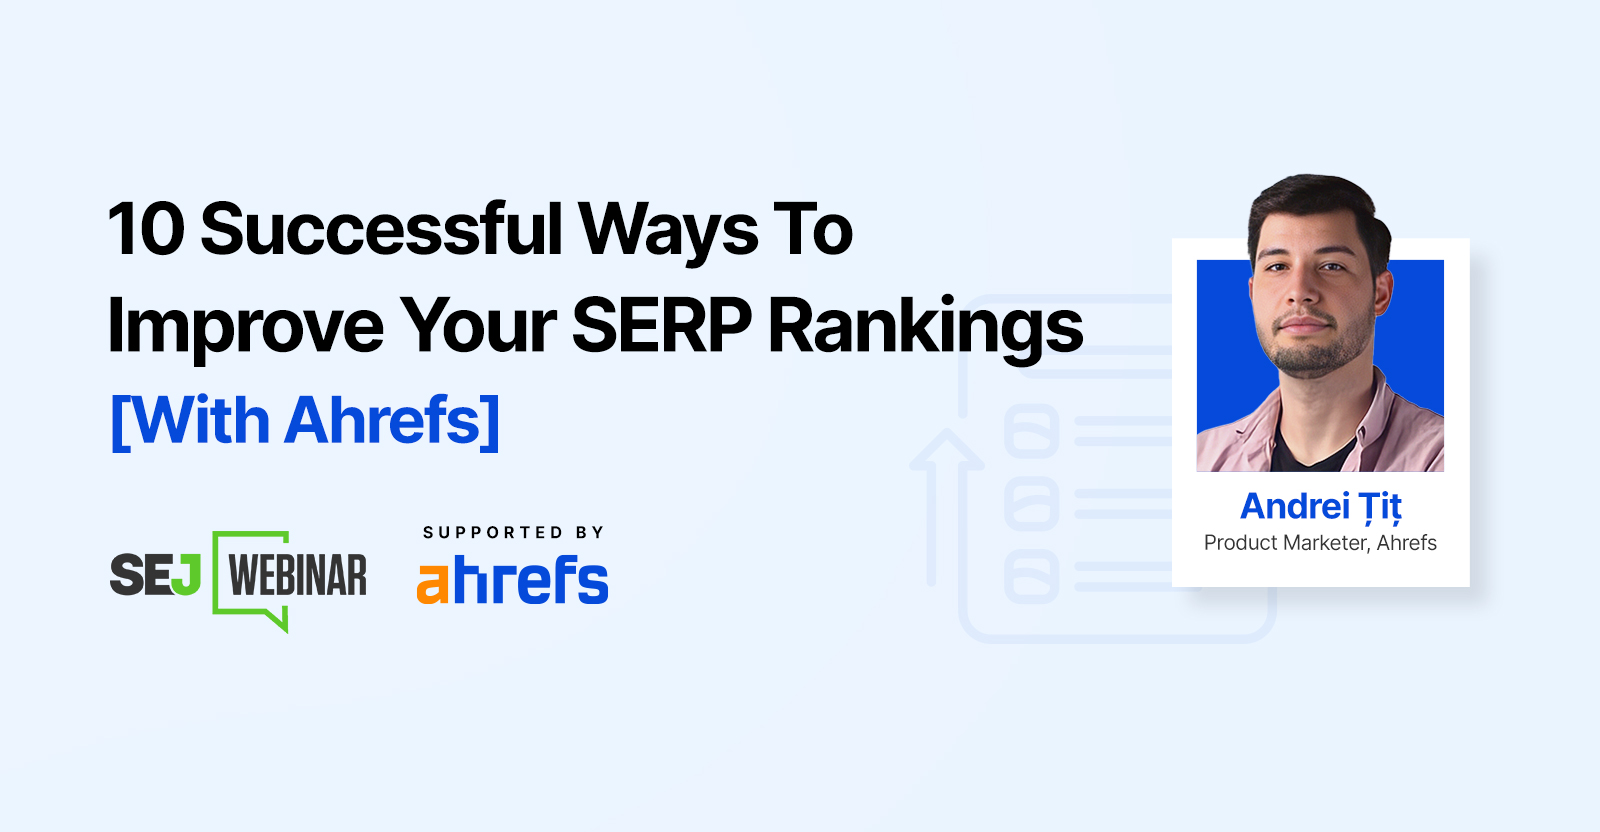 10 Successful Ways To Improve Your SERP Rankings